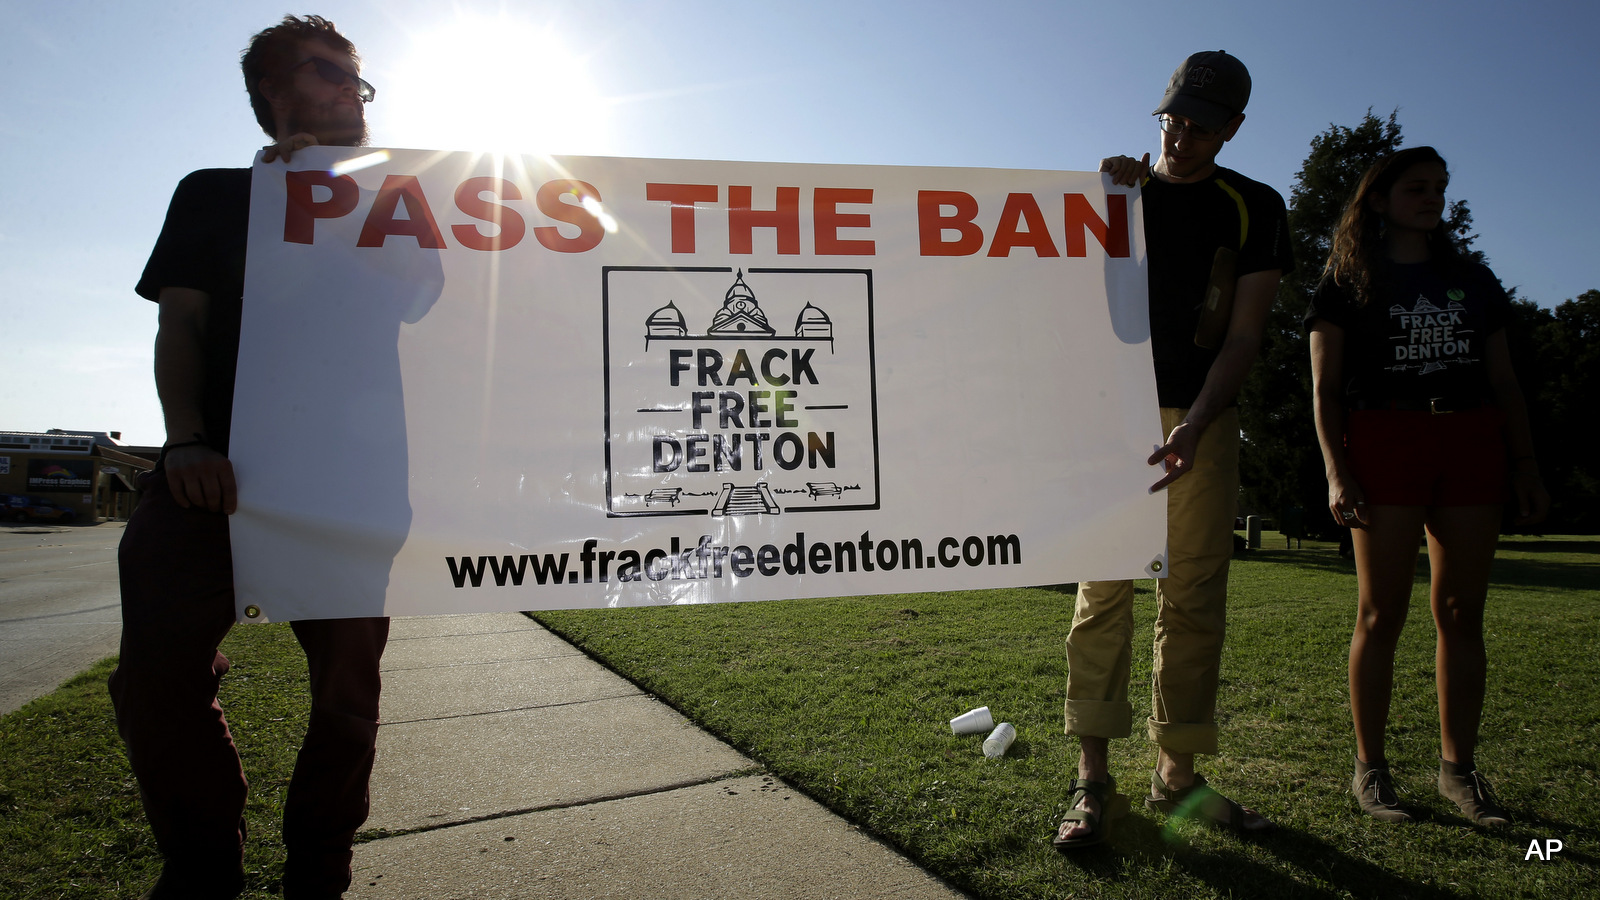 Residents of Denton, Texas, hold a campaign sign outside city hall, in Denton, Texas. Texas moved to ban its own cities from imposing prohibitions on hydraulic fracturing and other potentially environmentally harmful oil and natural gas drilling activities within their boundaries _ a major victory for industry groups and top conservatives who have decried rampant local “overregulation.” 